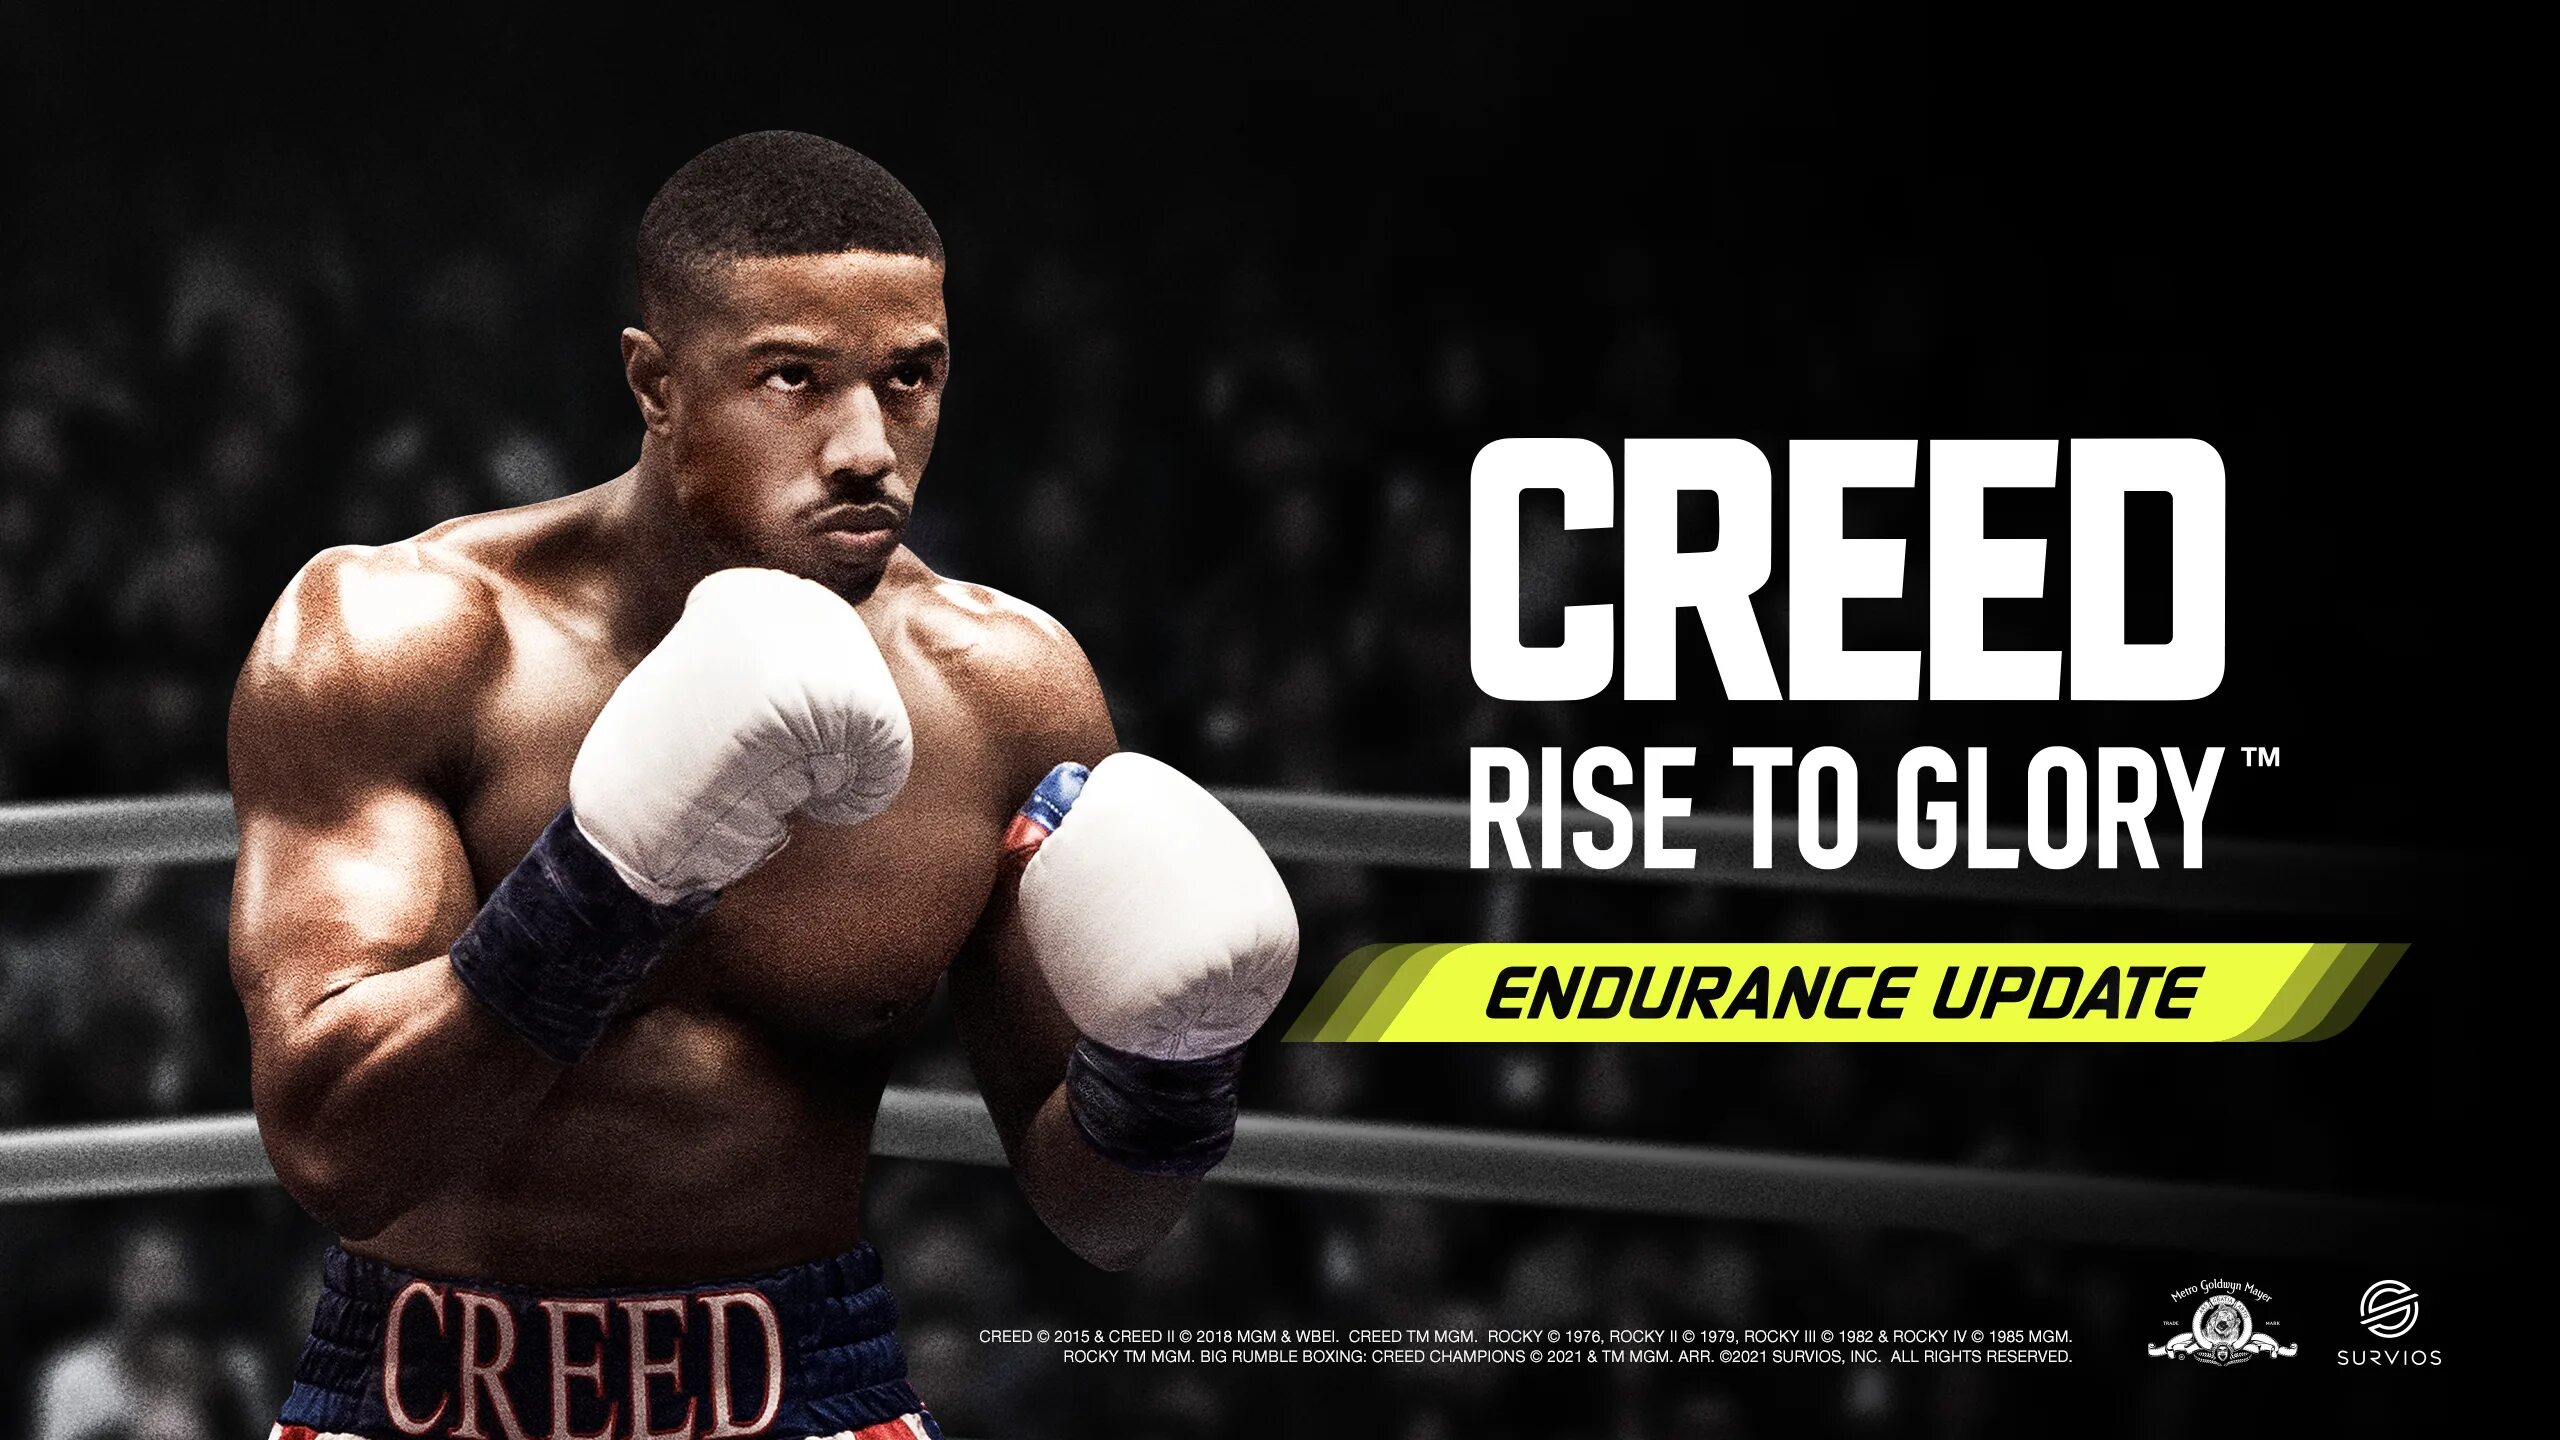 Creed glory vr. Oculus Quest 2 Creed. Creed Rise to Glory VR Oculus Quest 2. Бокс Oculus Quest 2. Creed Box 3 VR.